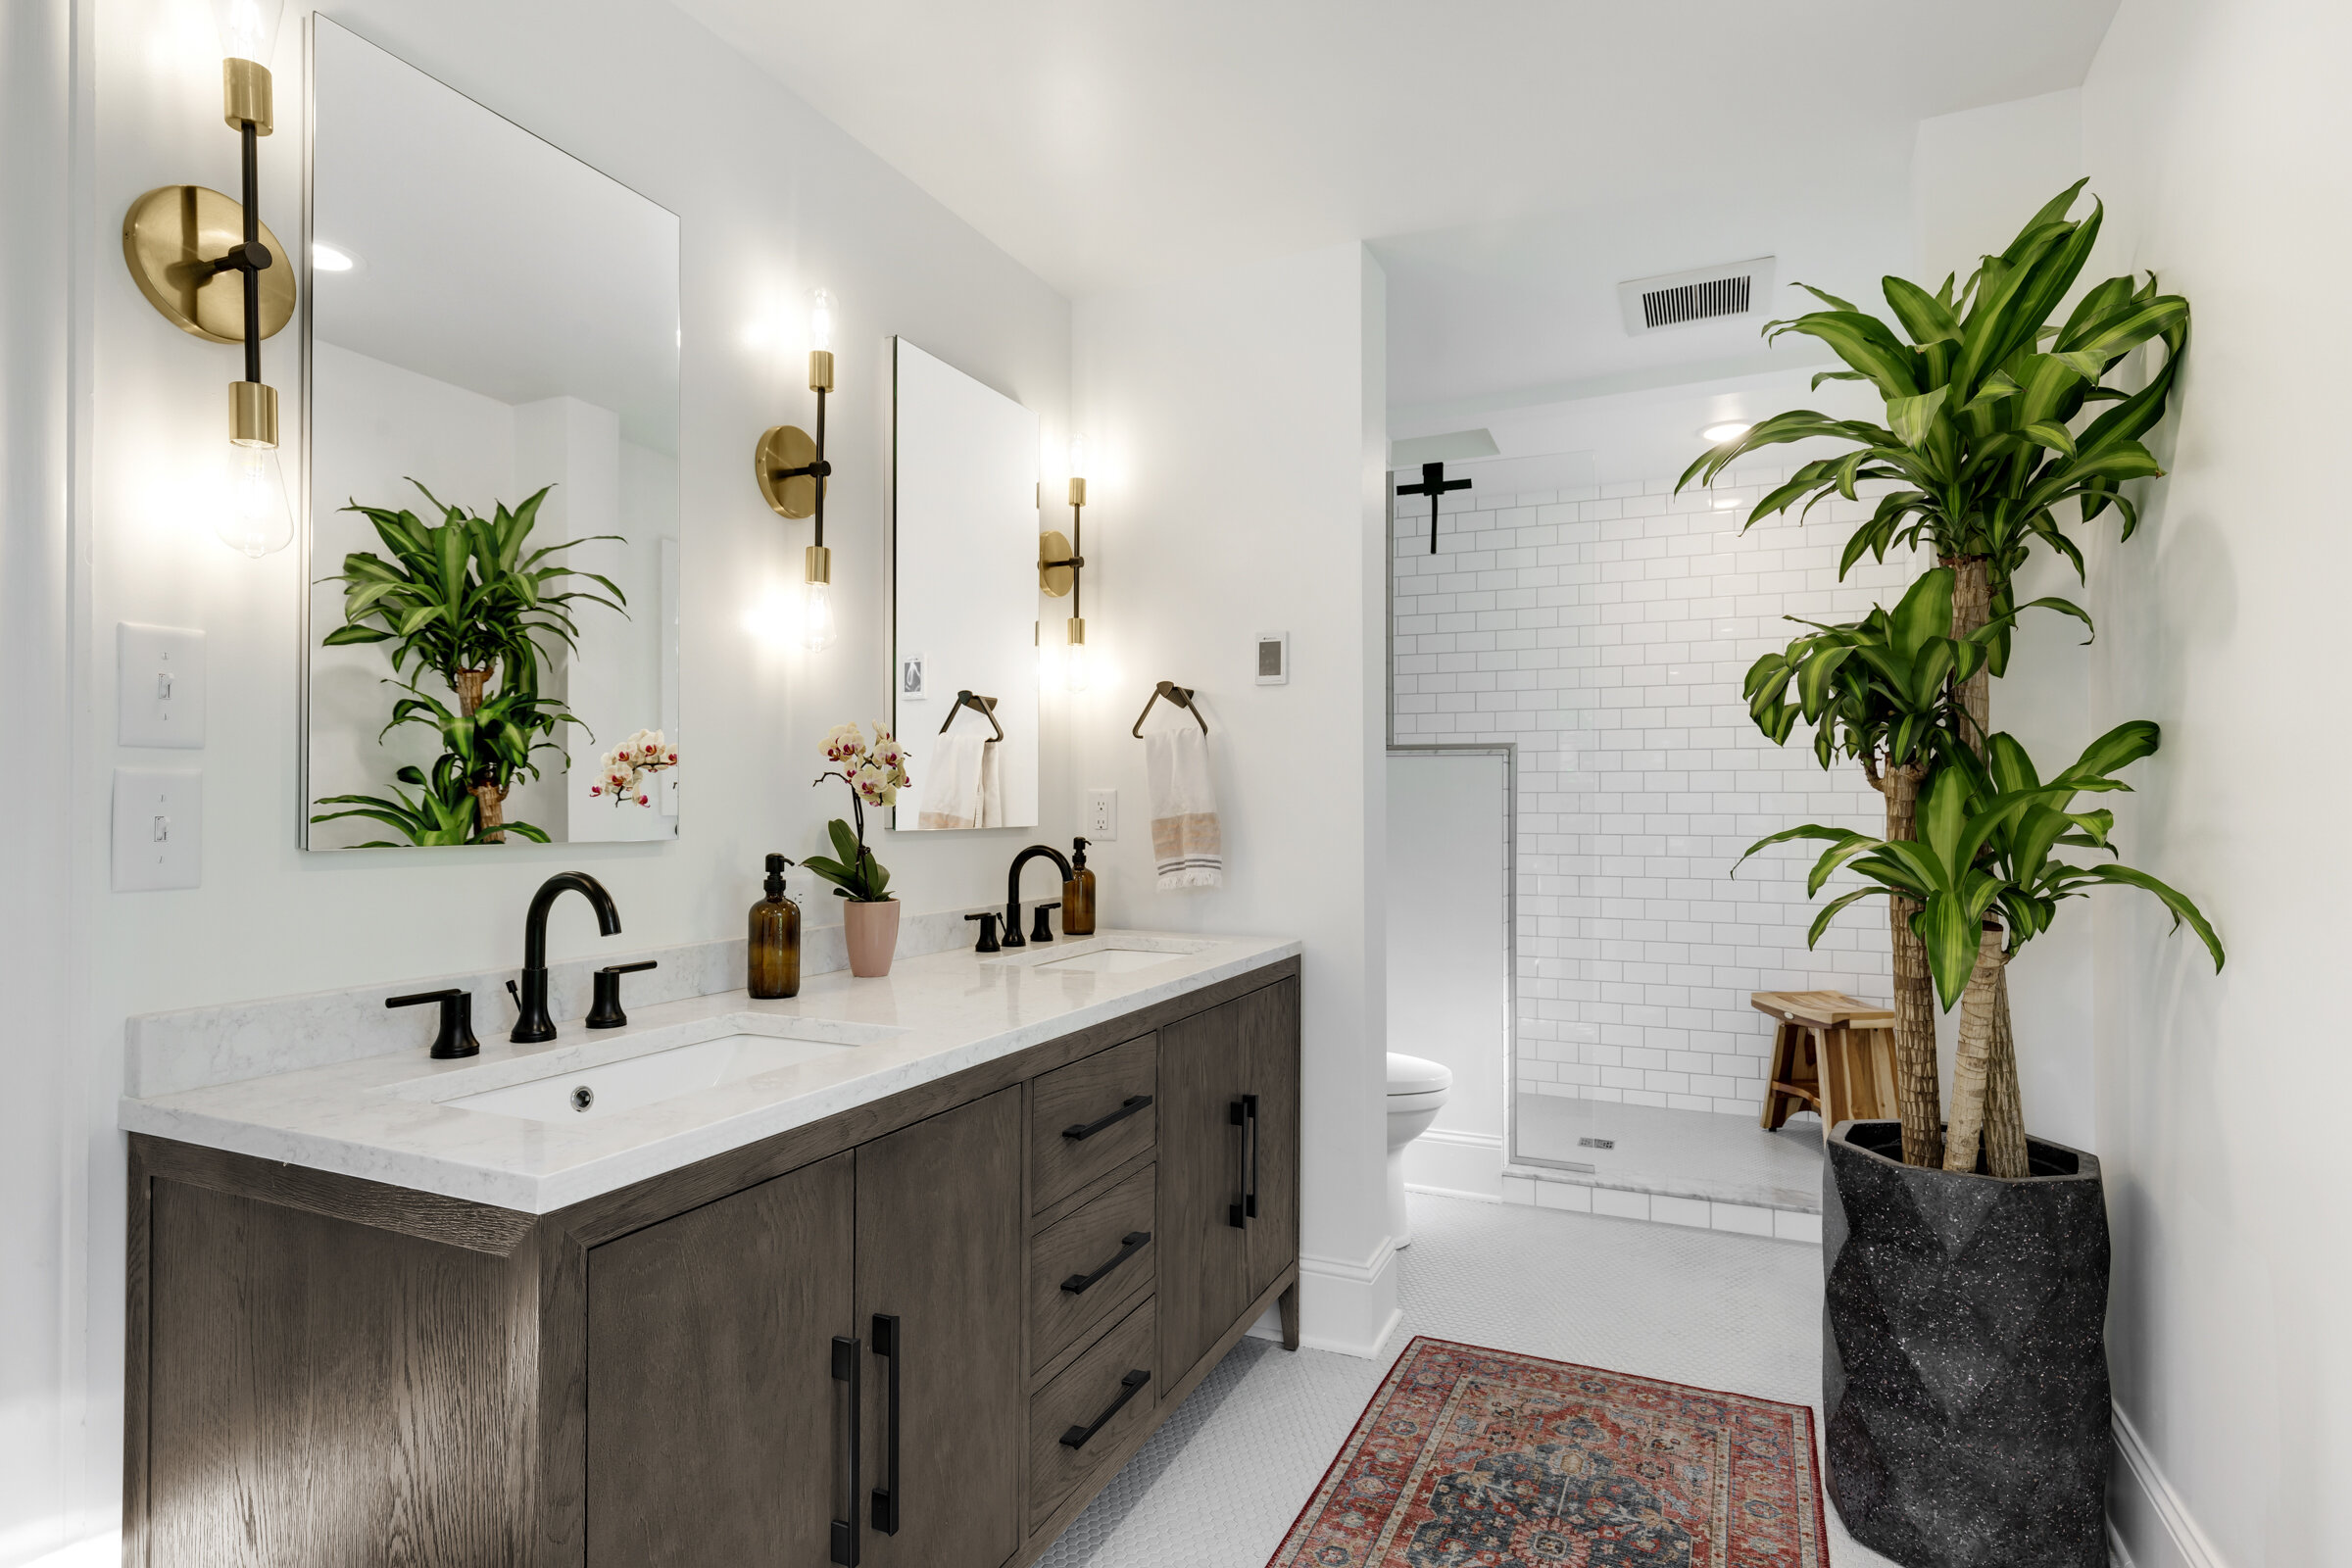 Persevering Through Problems How Much A Bathroom Remodel Costs In Minneapolis 2020